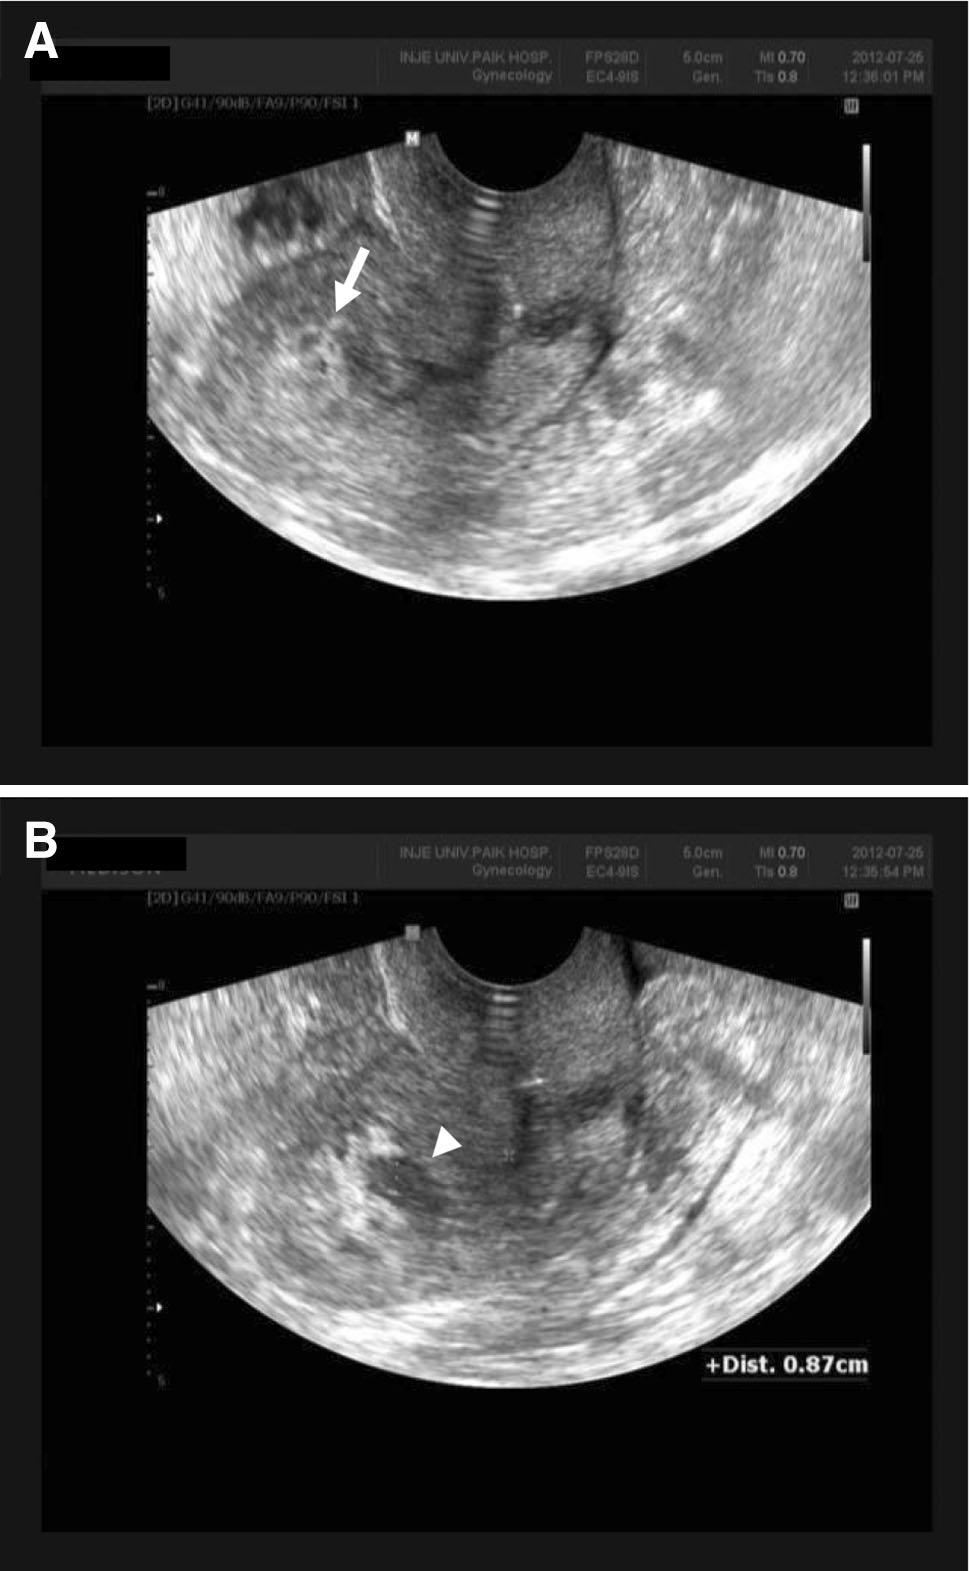 Byun et al. The Journal of Obstetrics and Gynecology of India (July August 2015) 65(4):273 277 diagnosis of an endometrial polyp [8, 9] or sometimes leiomyoma [10].